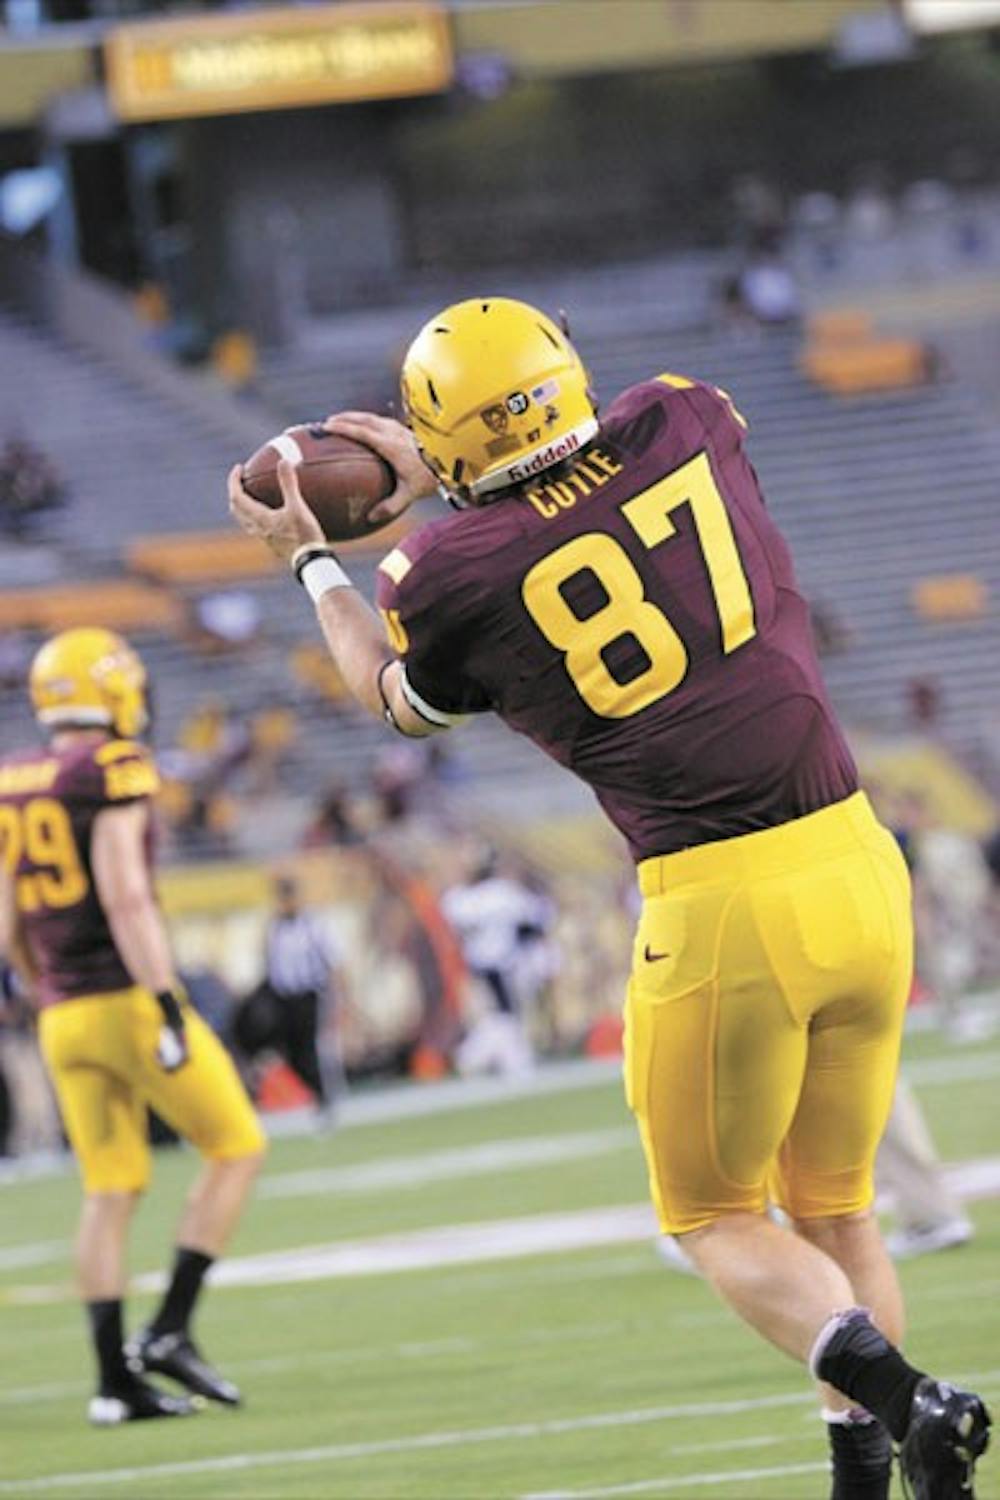 Junior tight end Chris Coyle catches a pass during the Sun Devils’ 63-6 win over NAU on Aug. 30. (Photo by Kyle Newman)